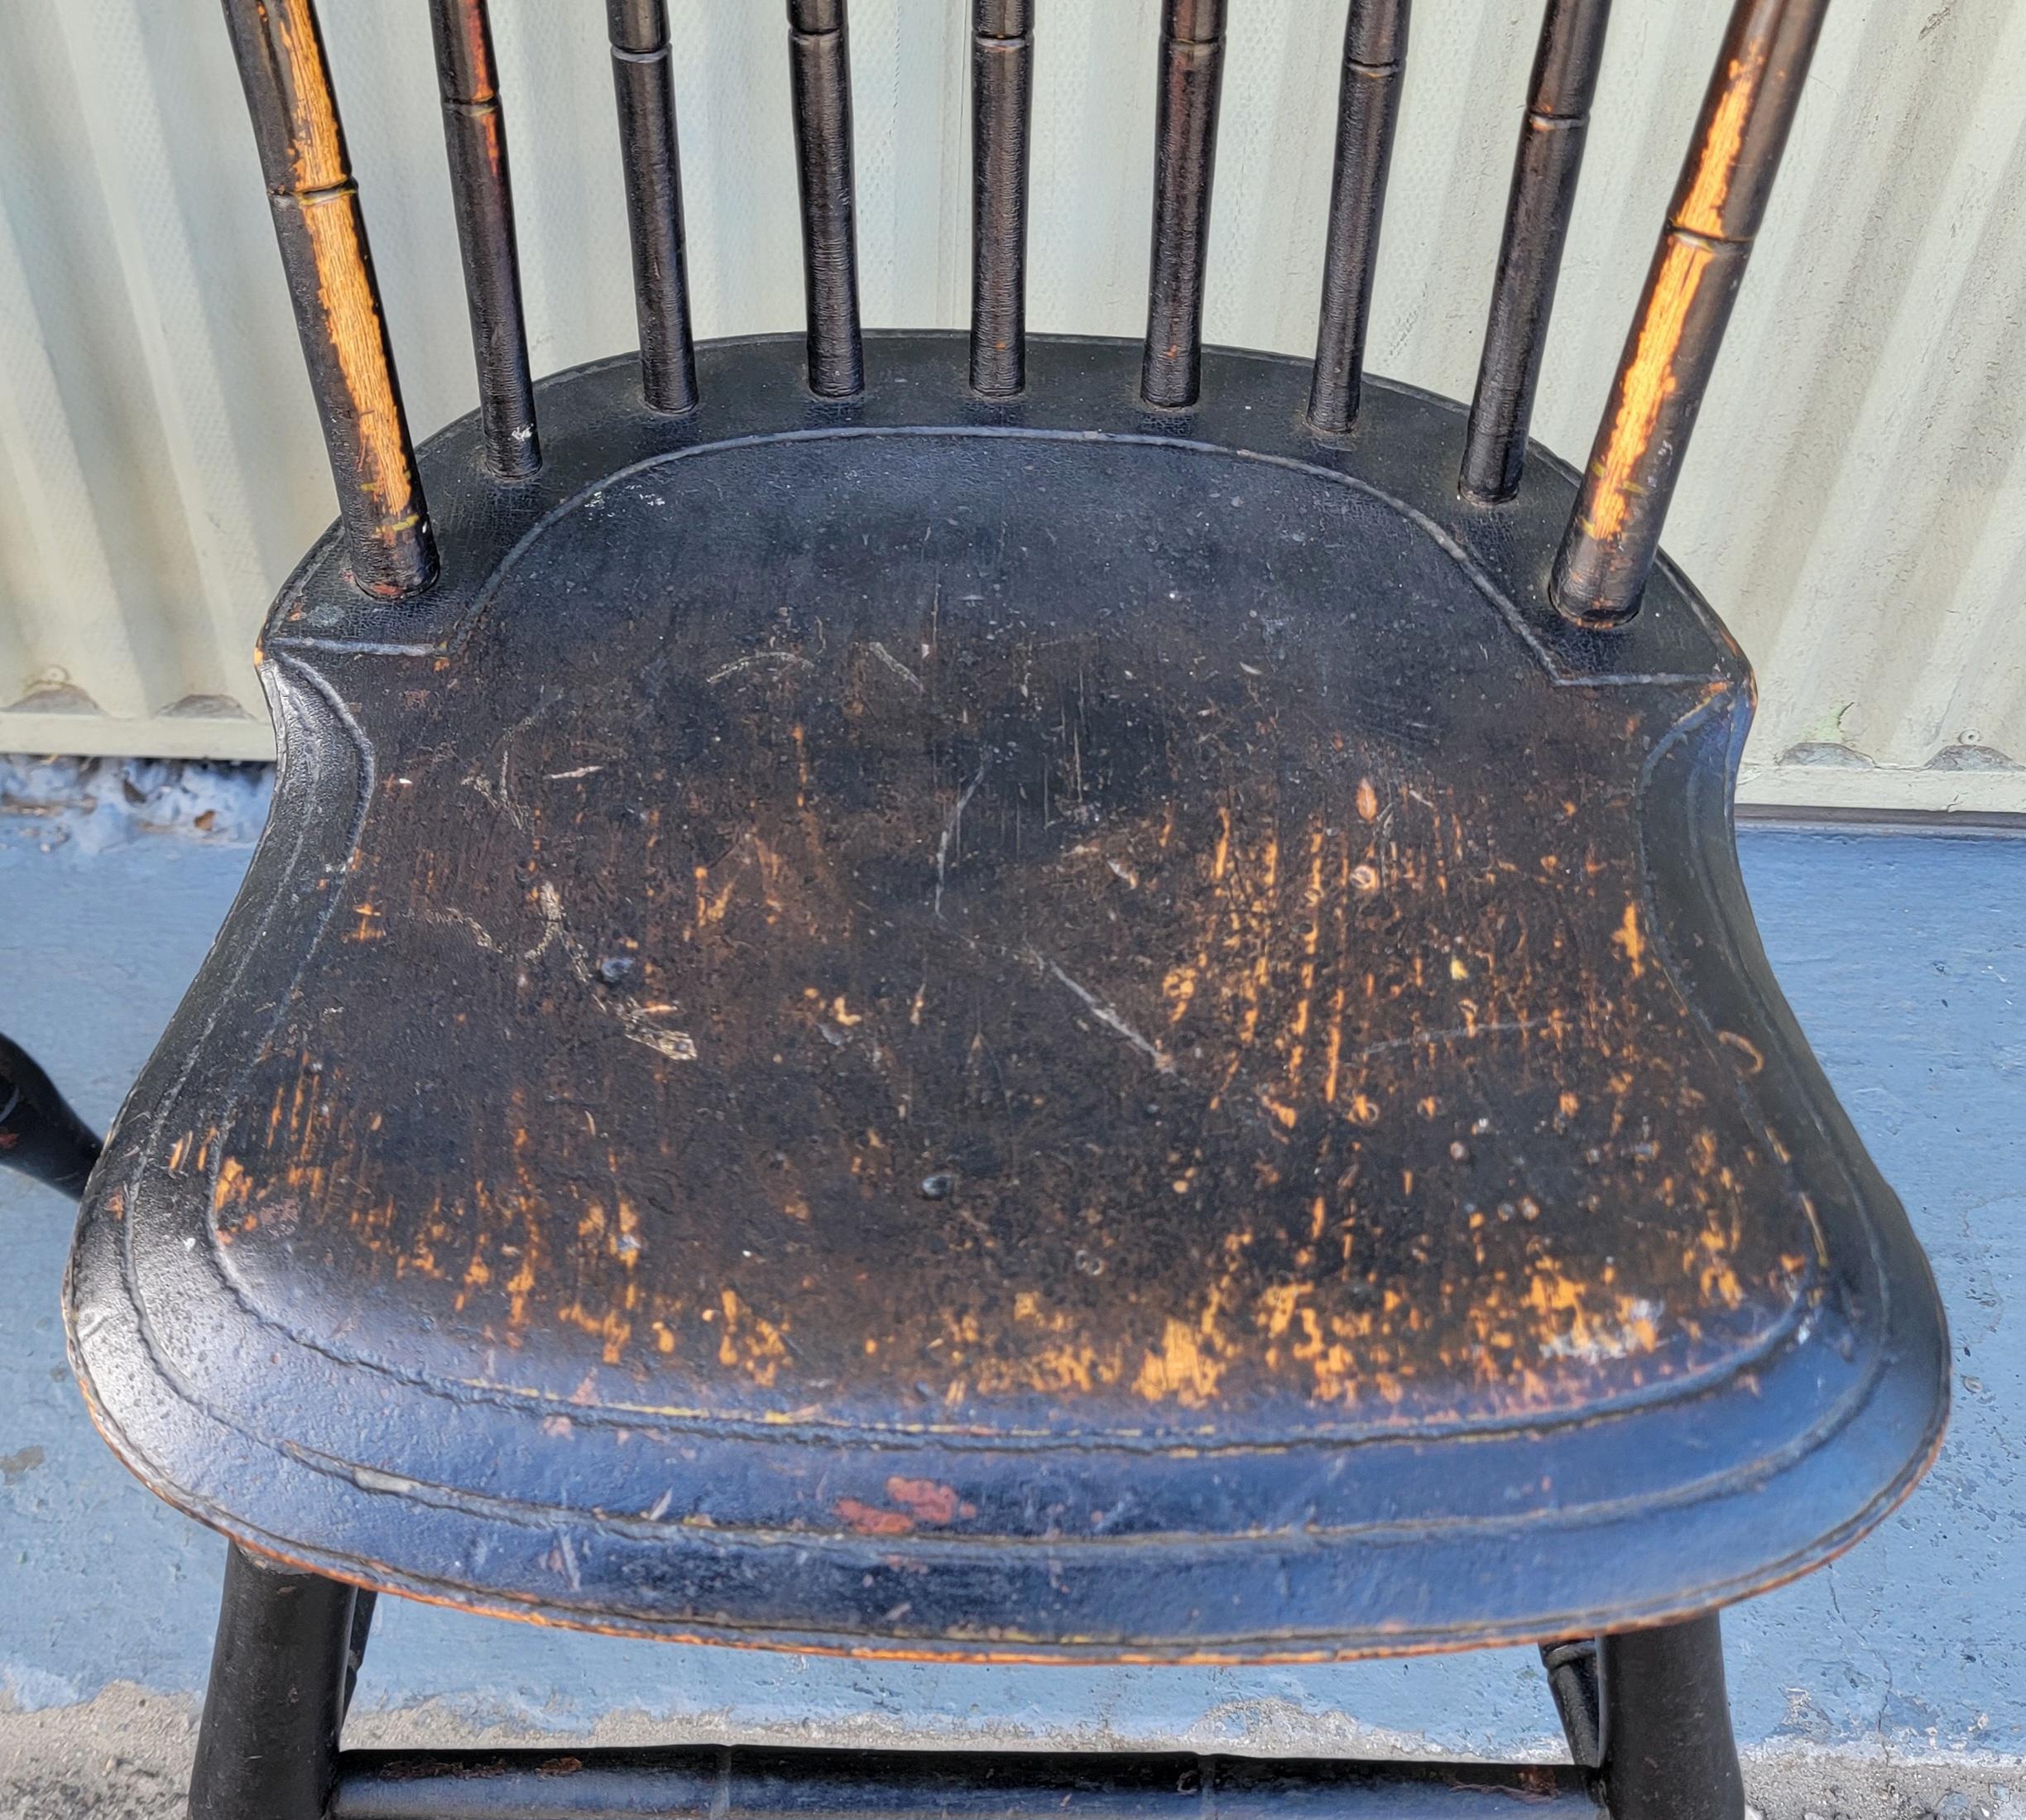 These 19thc Original black painted Windsor chairs were found in Pennsylvania and in great condition.They have a fine worn patina and very strong & sturdy.